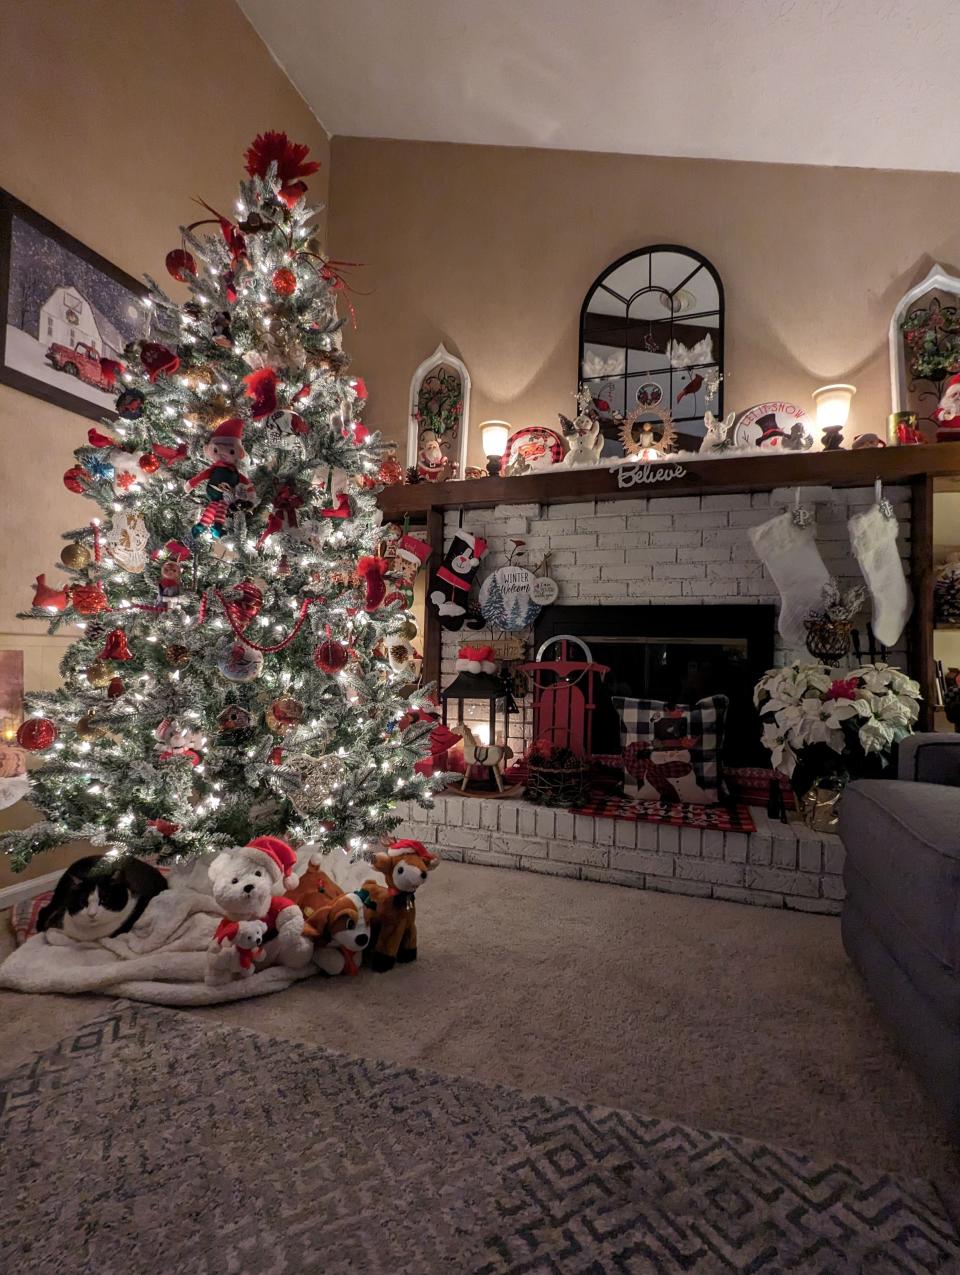 “Tuxedo Kitty Old Fashion Christmas” by Janet Konicek of Westerville